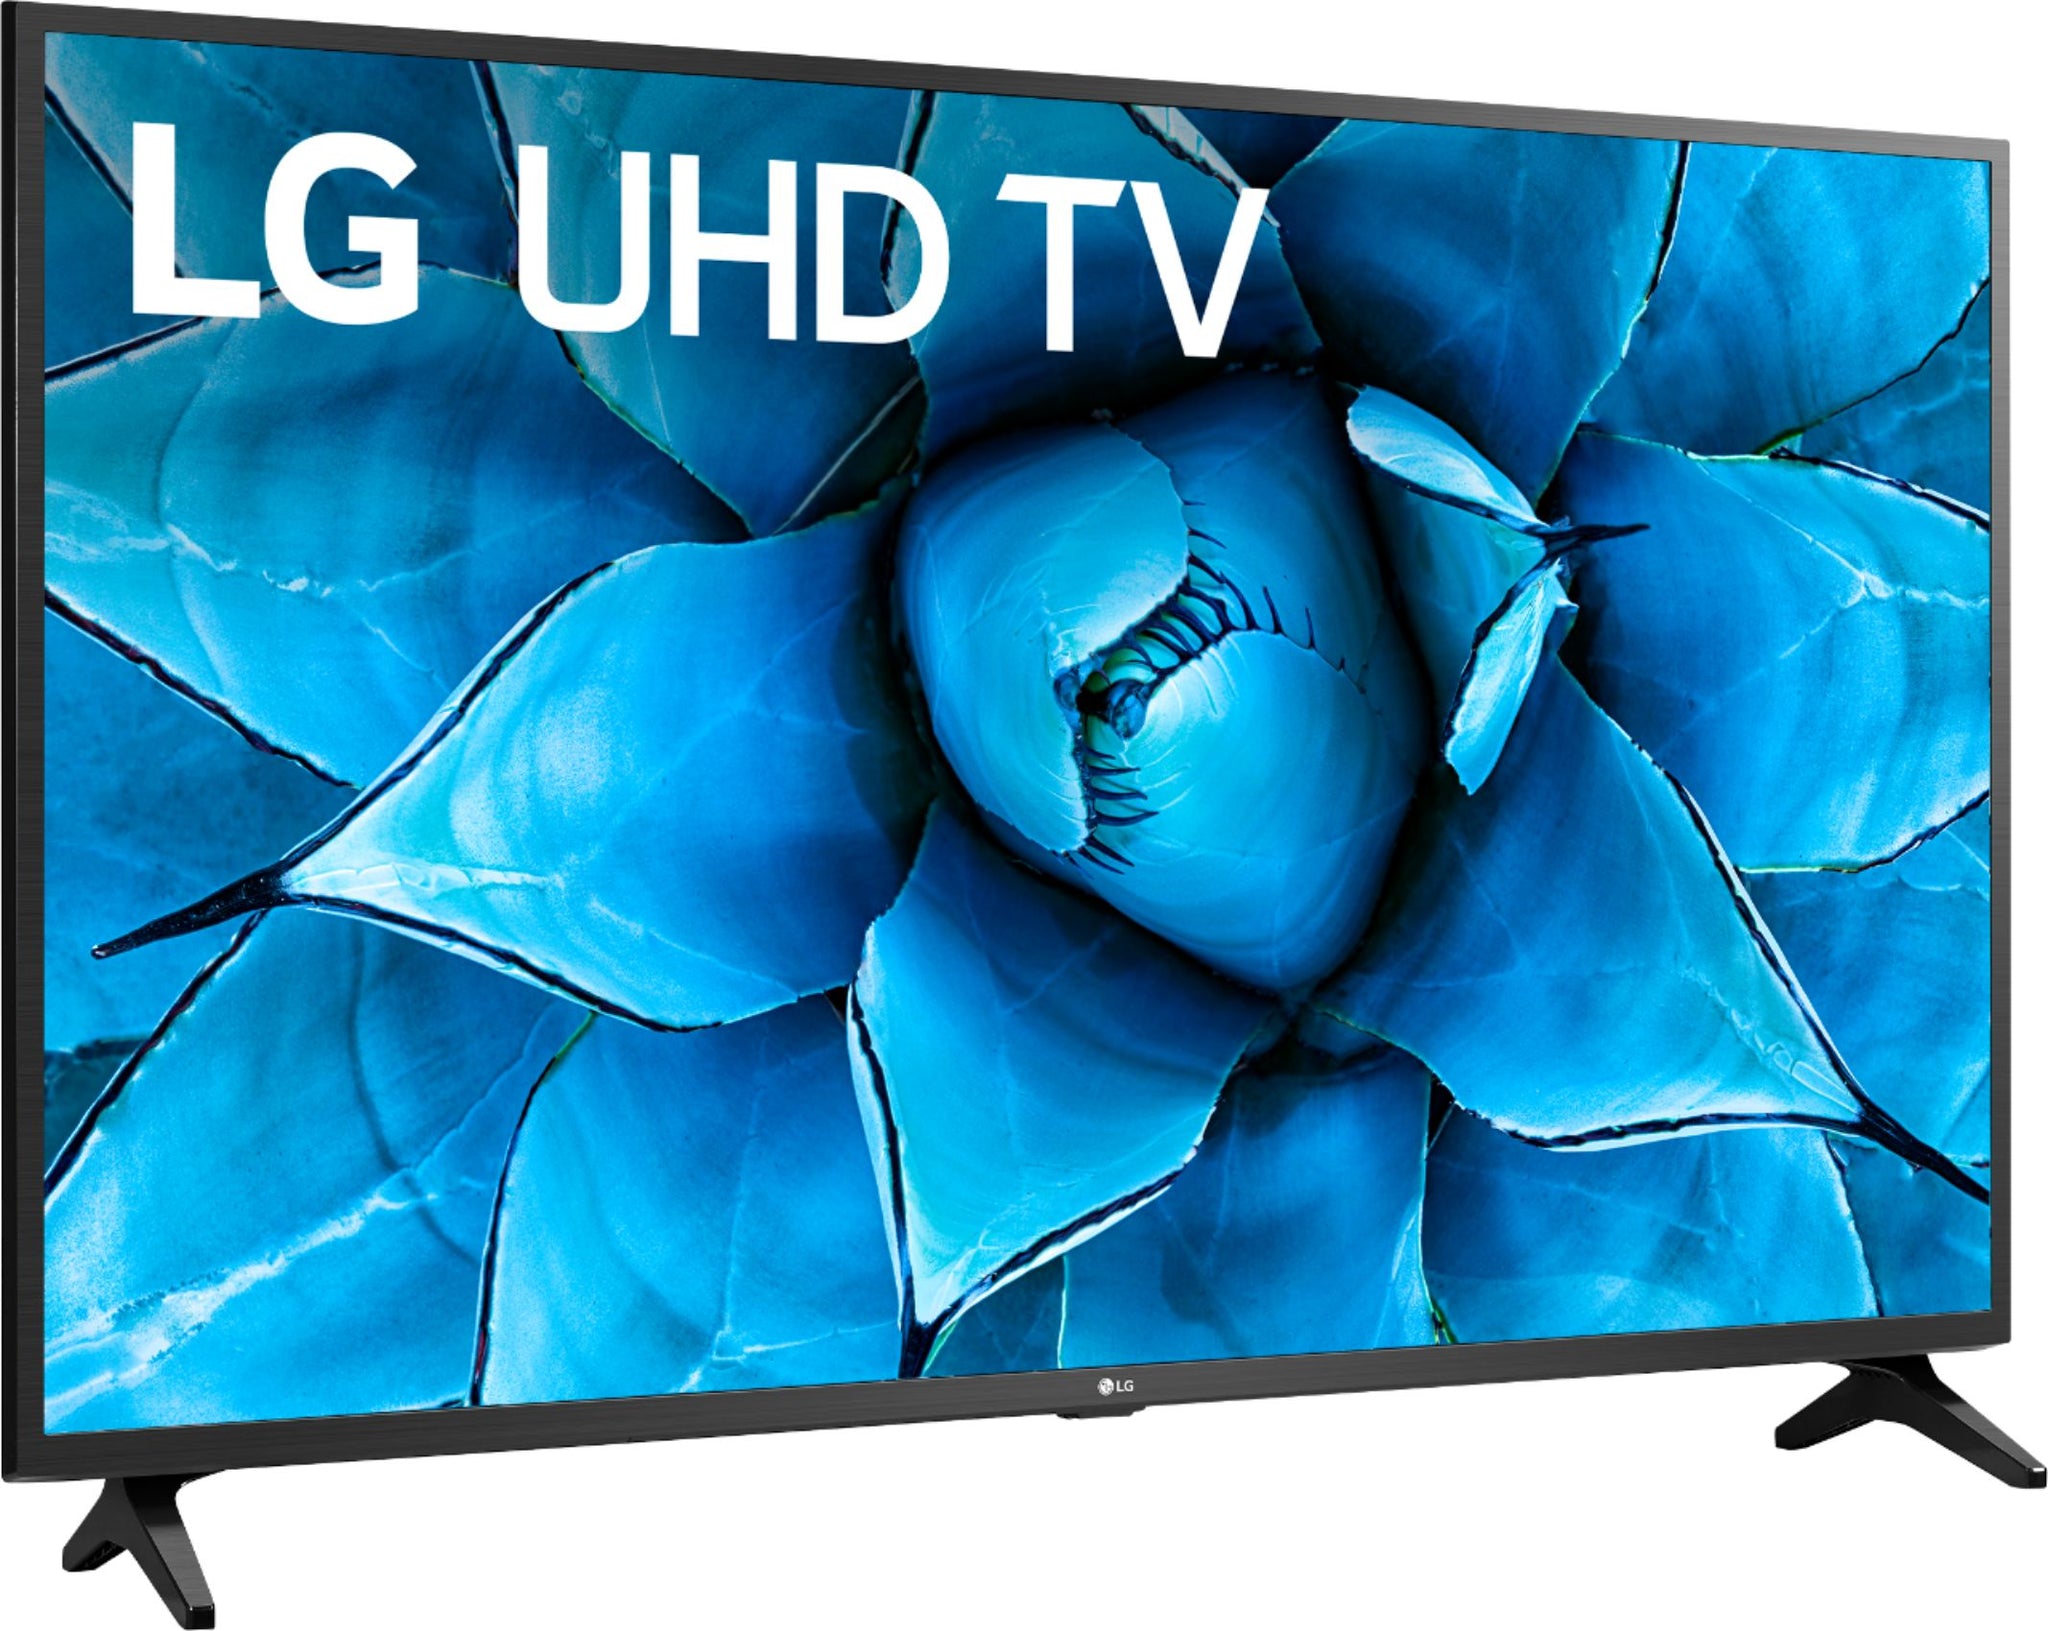 LG 55" 4K Smart webOS TV UHD w/ AI ThinQ(Refurbished) Tv's ONLY for delivery in San Diego and Tijuana